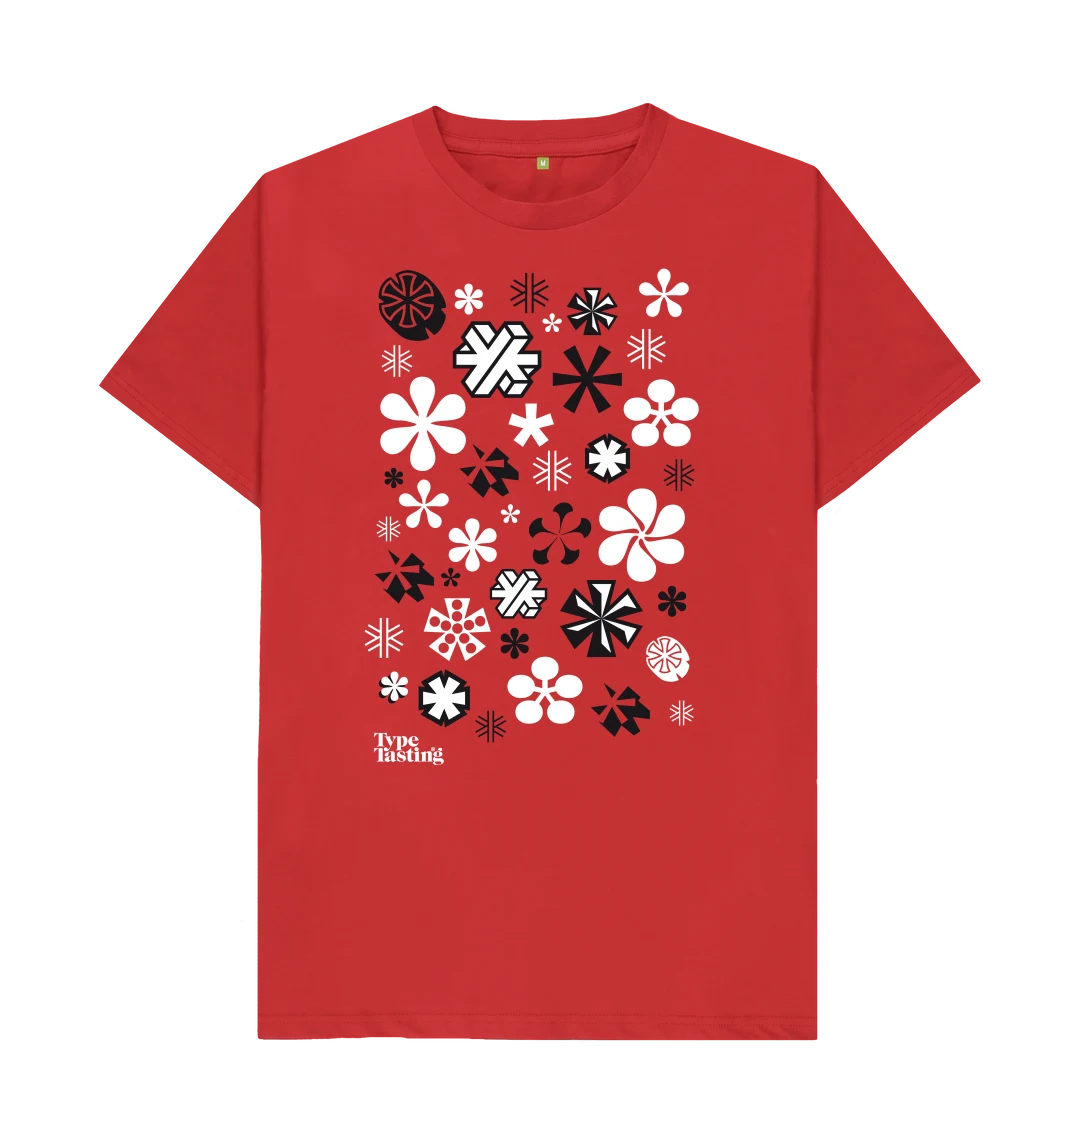 Red T-shirt printed with snow in the form of asterisks